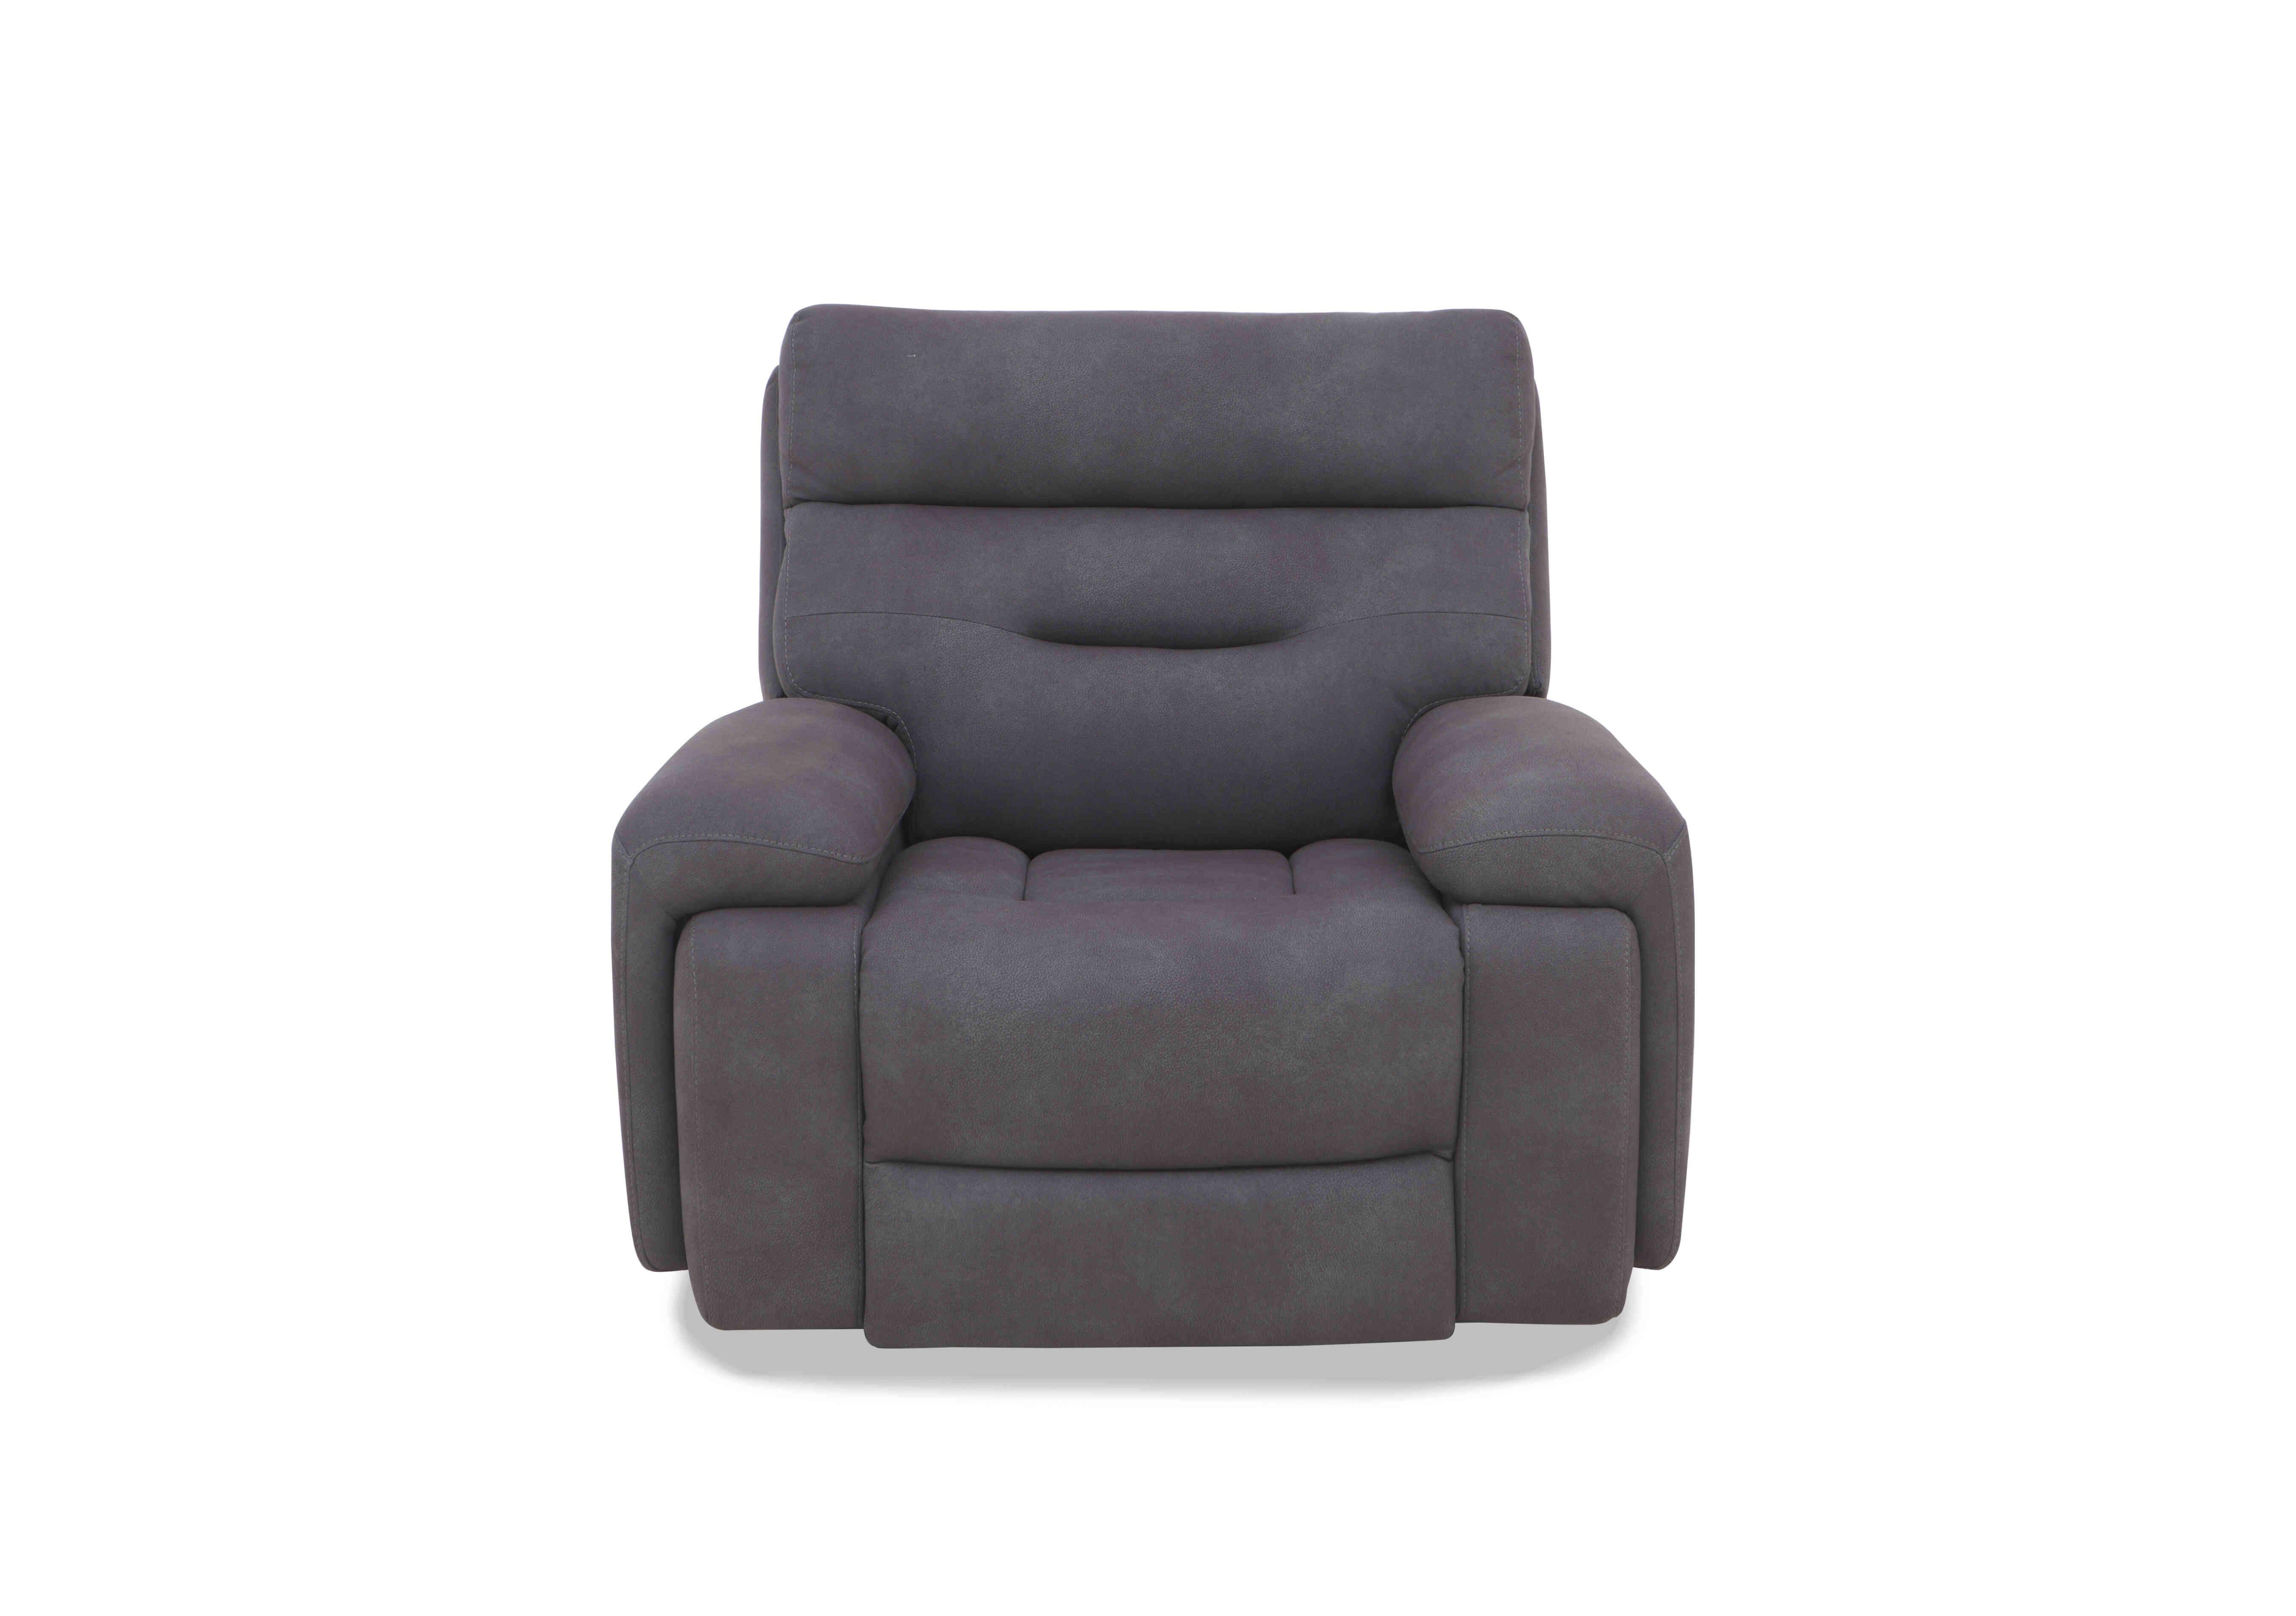 Cinemax Media Fabric Power Recliner Chair with Power Headrest in Np-1107 Nappa Grey on Furniture Village